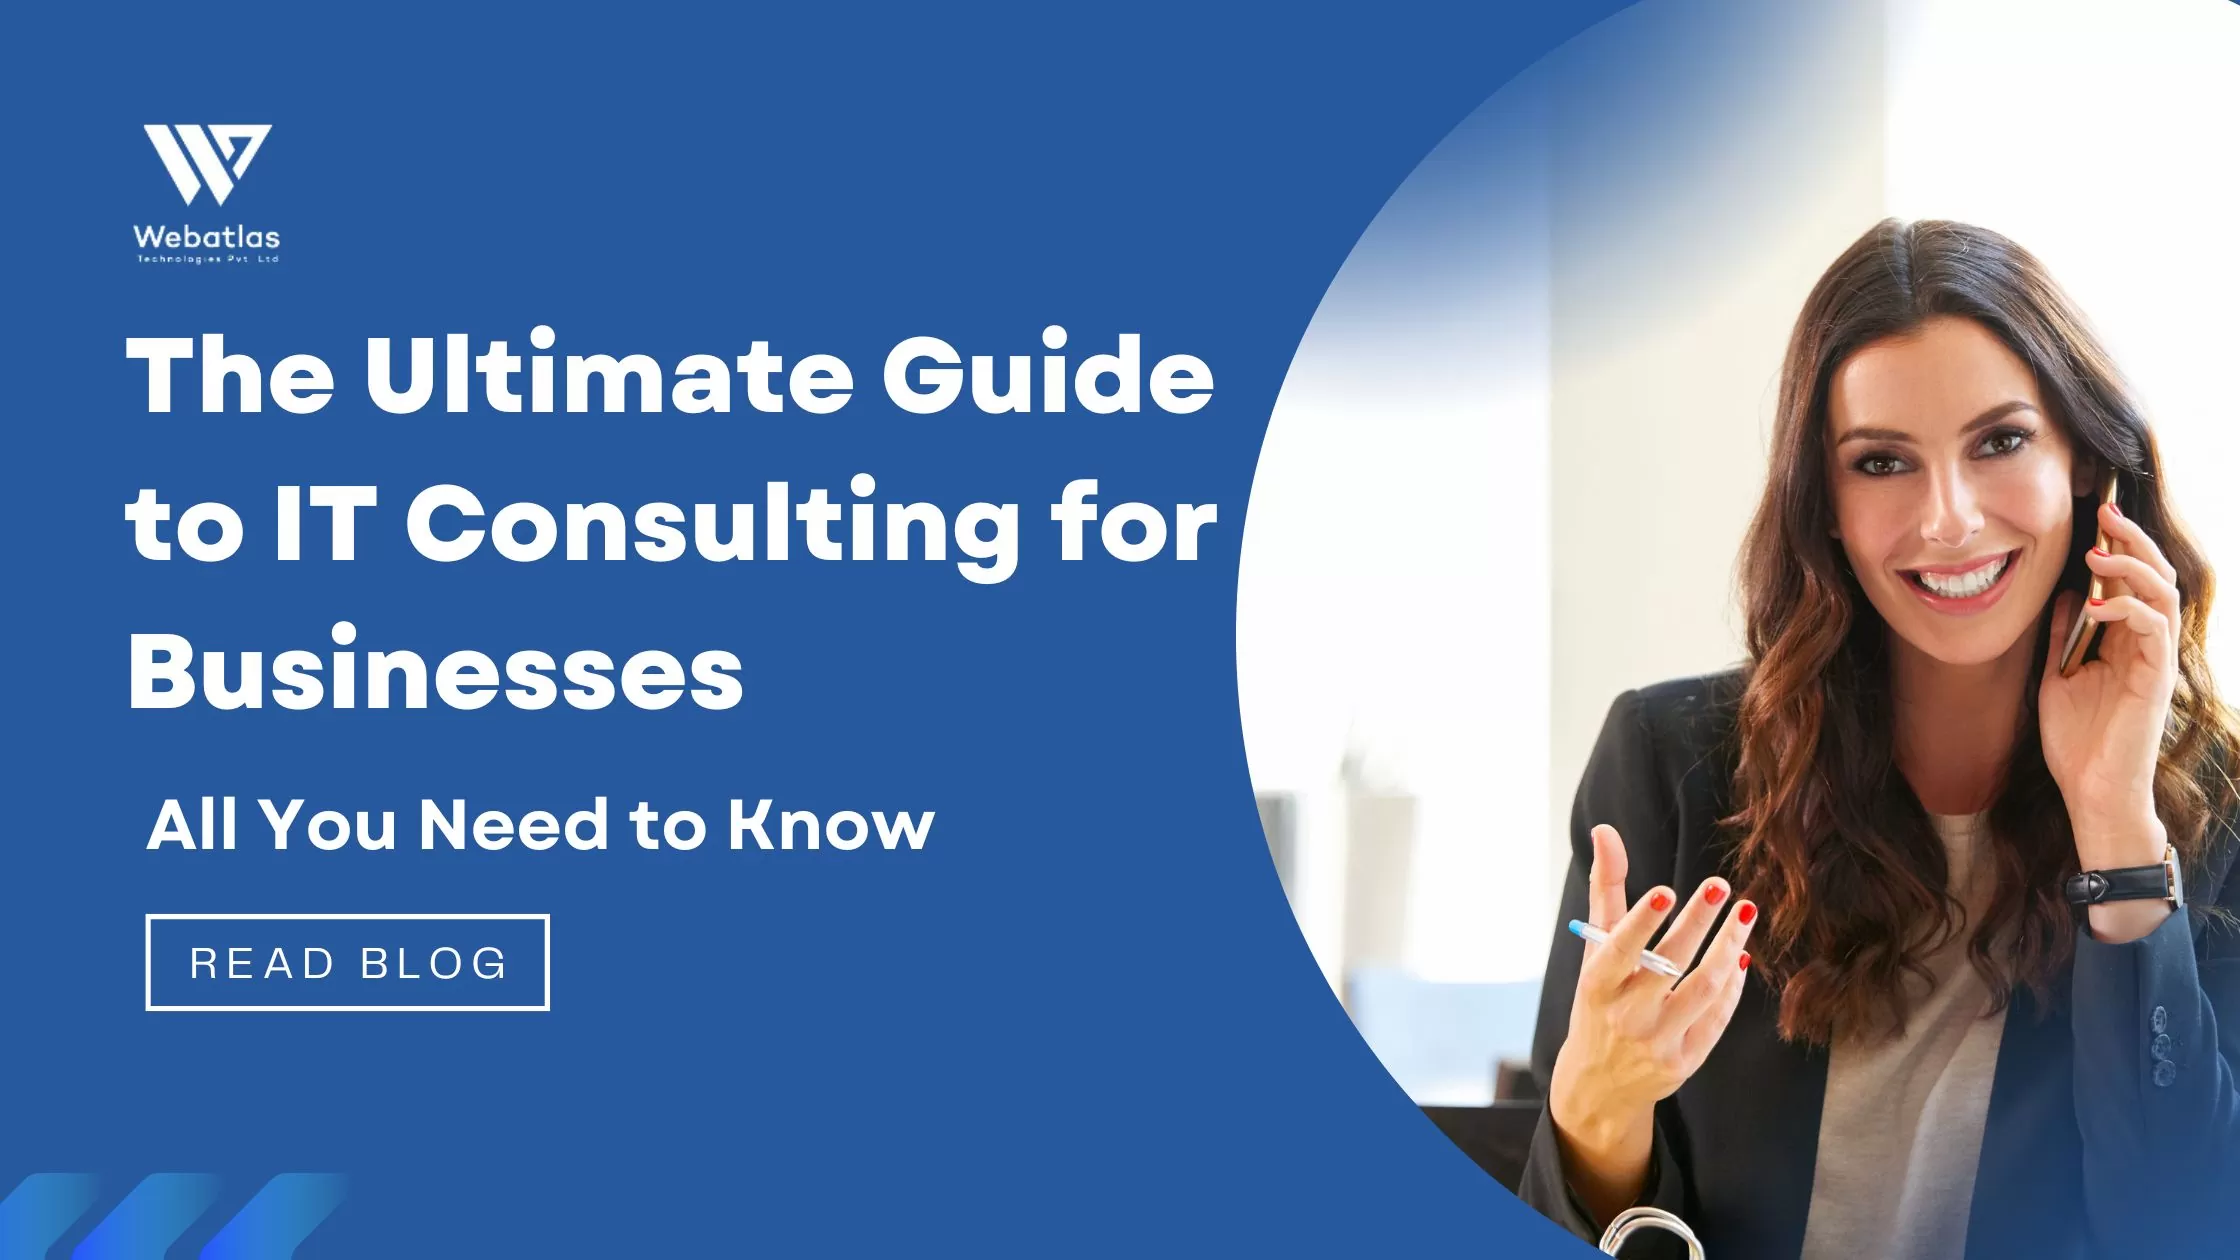 Does Your Business Need IT Consulting? Signs & Benefits